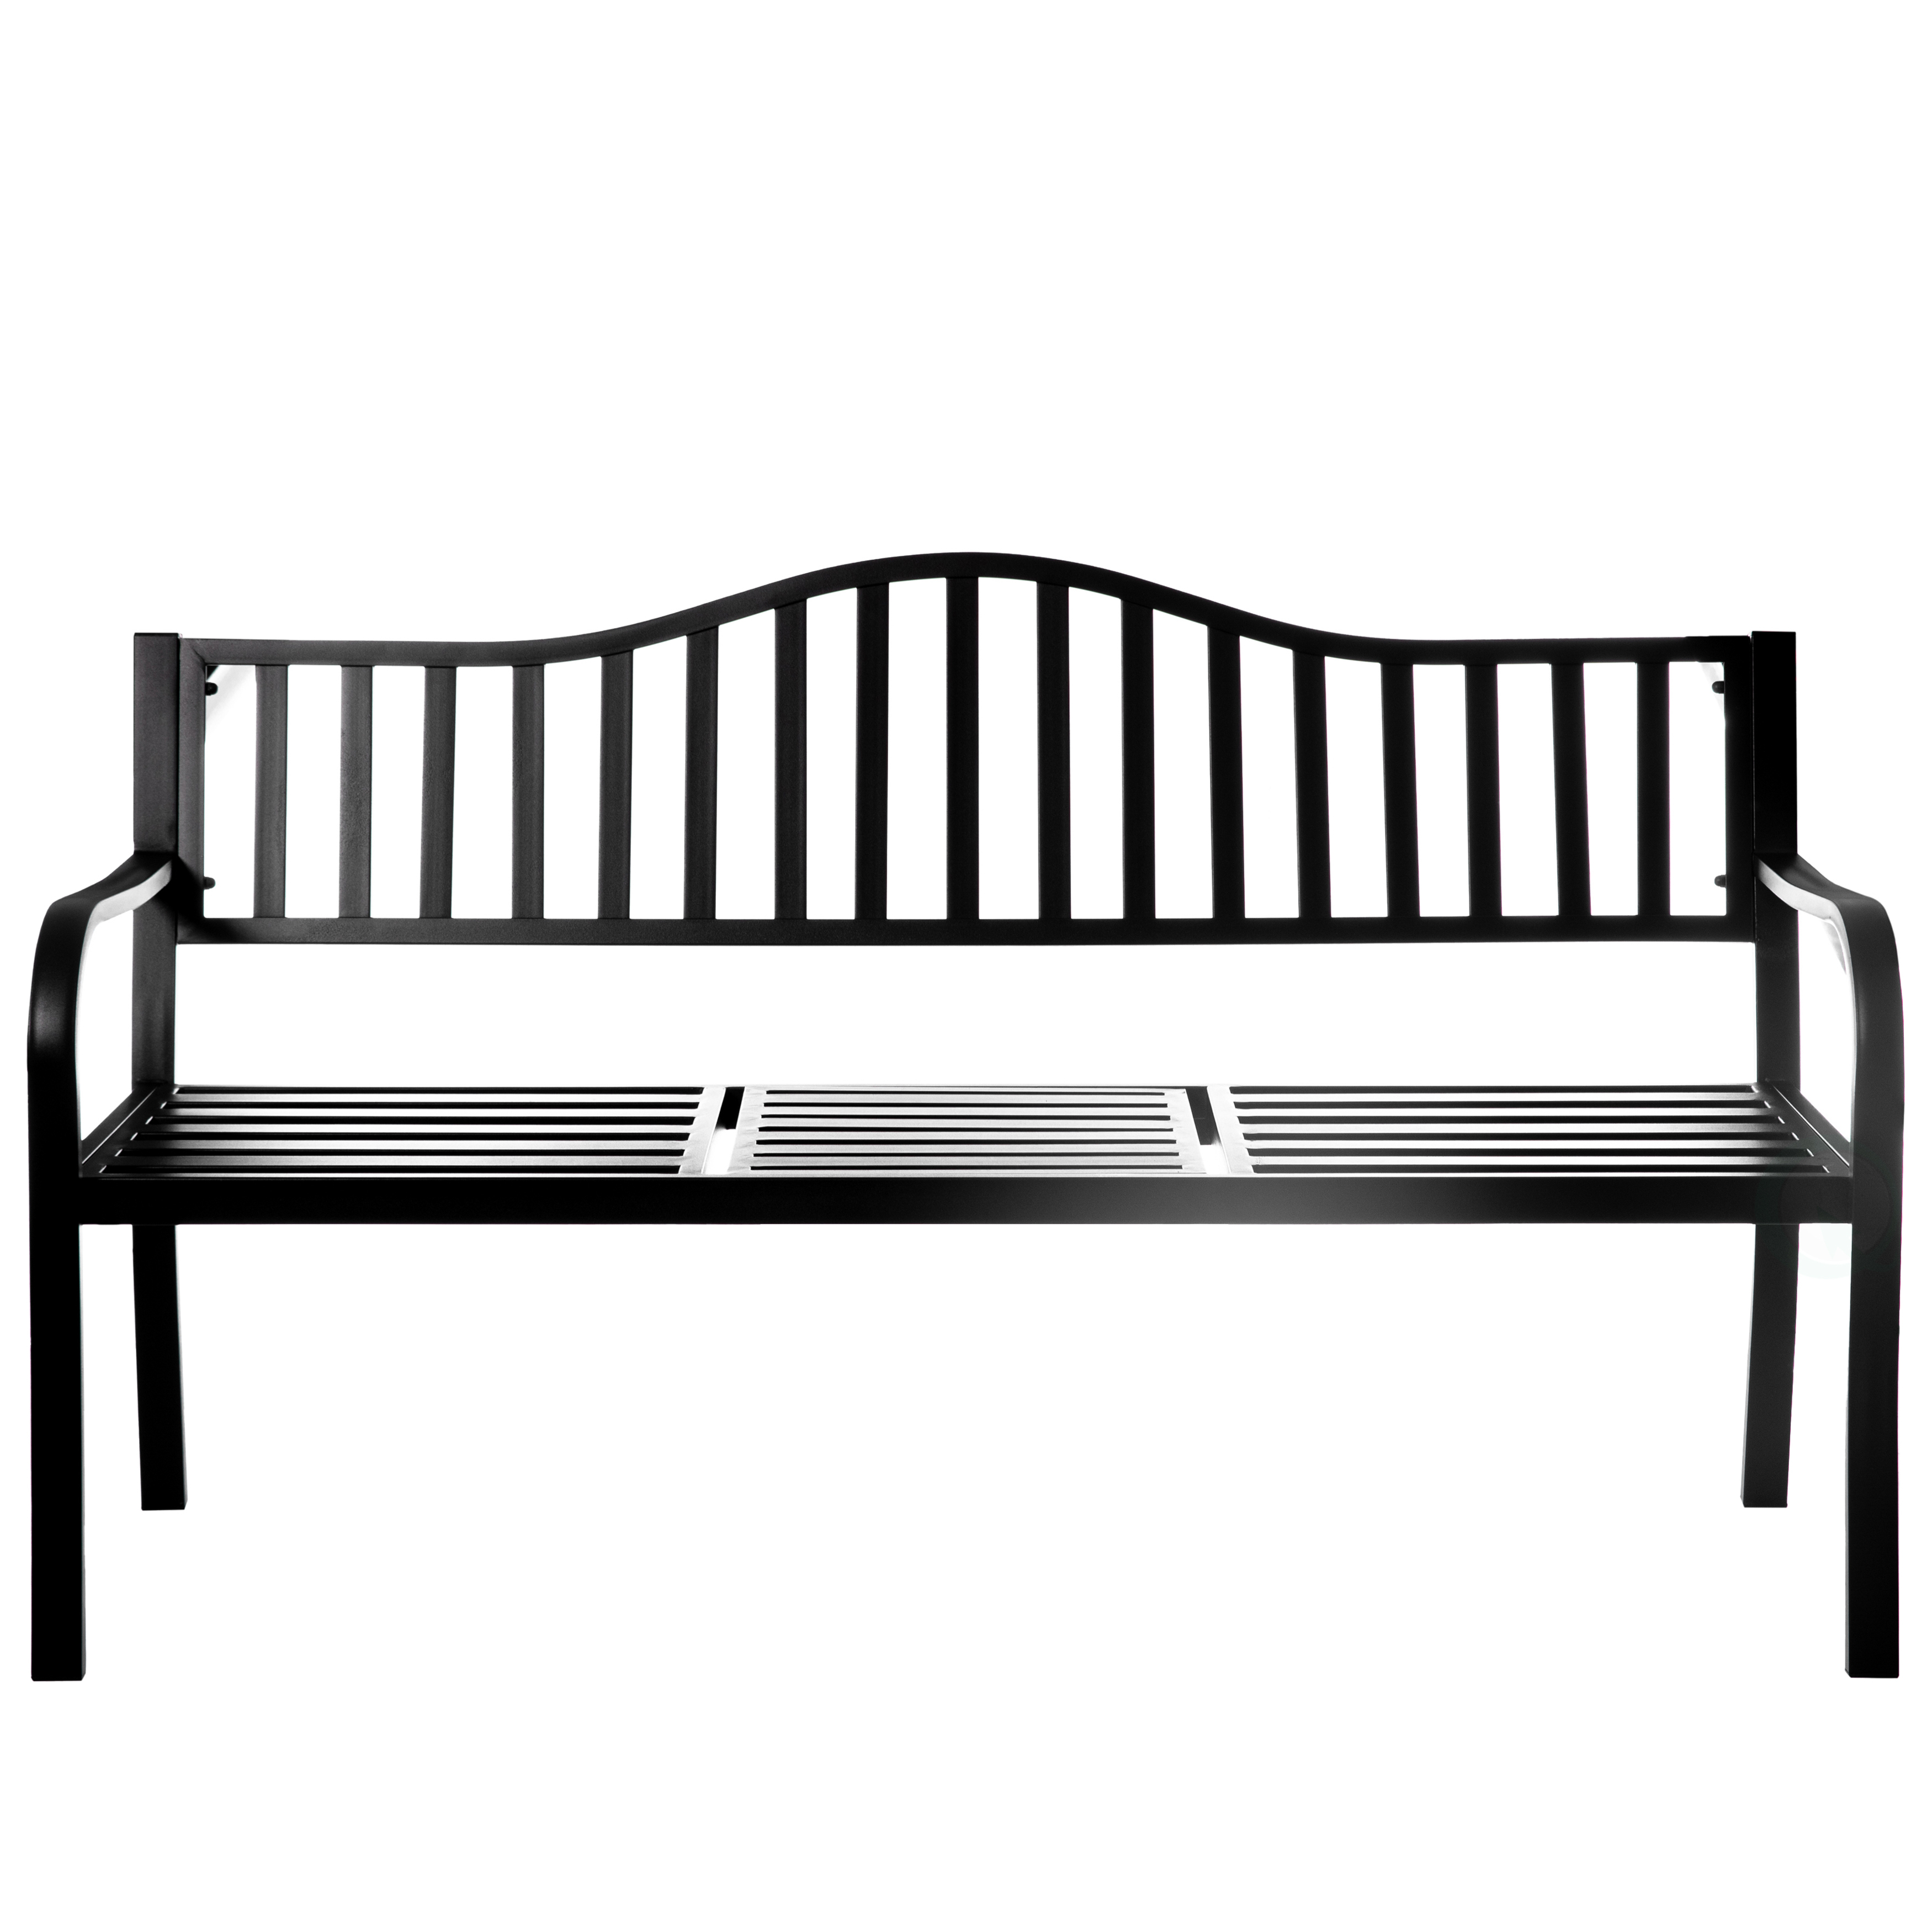 Outdoor Powder Coated Steel Park Bench, Garden Bench With Pop Up Middle Table, Lawn Decor Seating Bench For Yard, Patio, Garden, Balcony